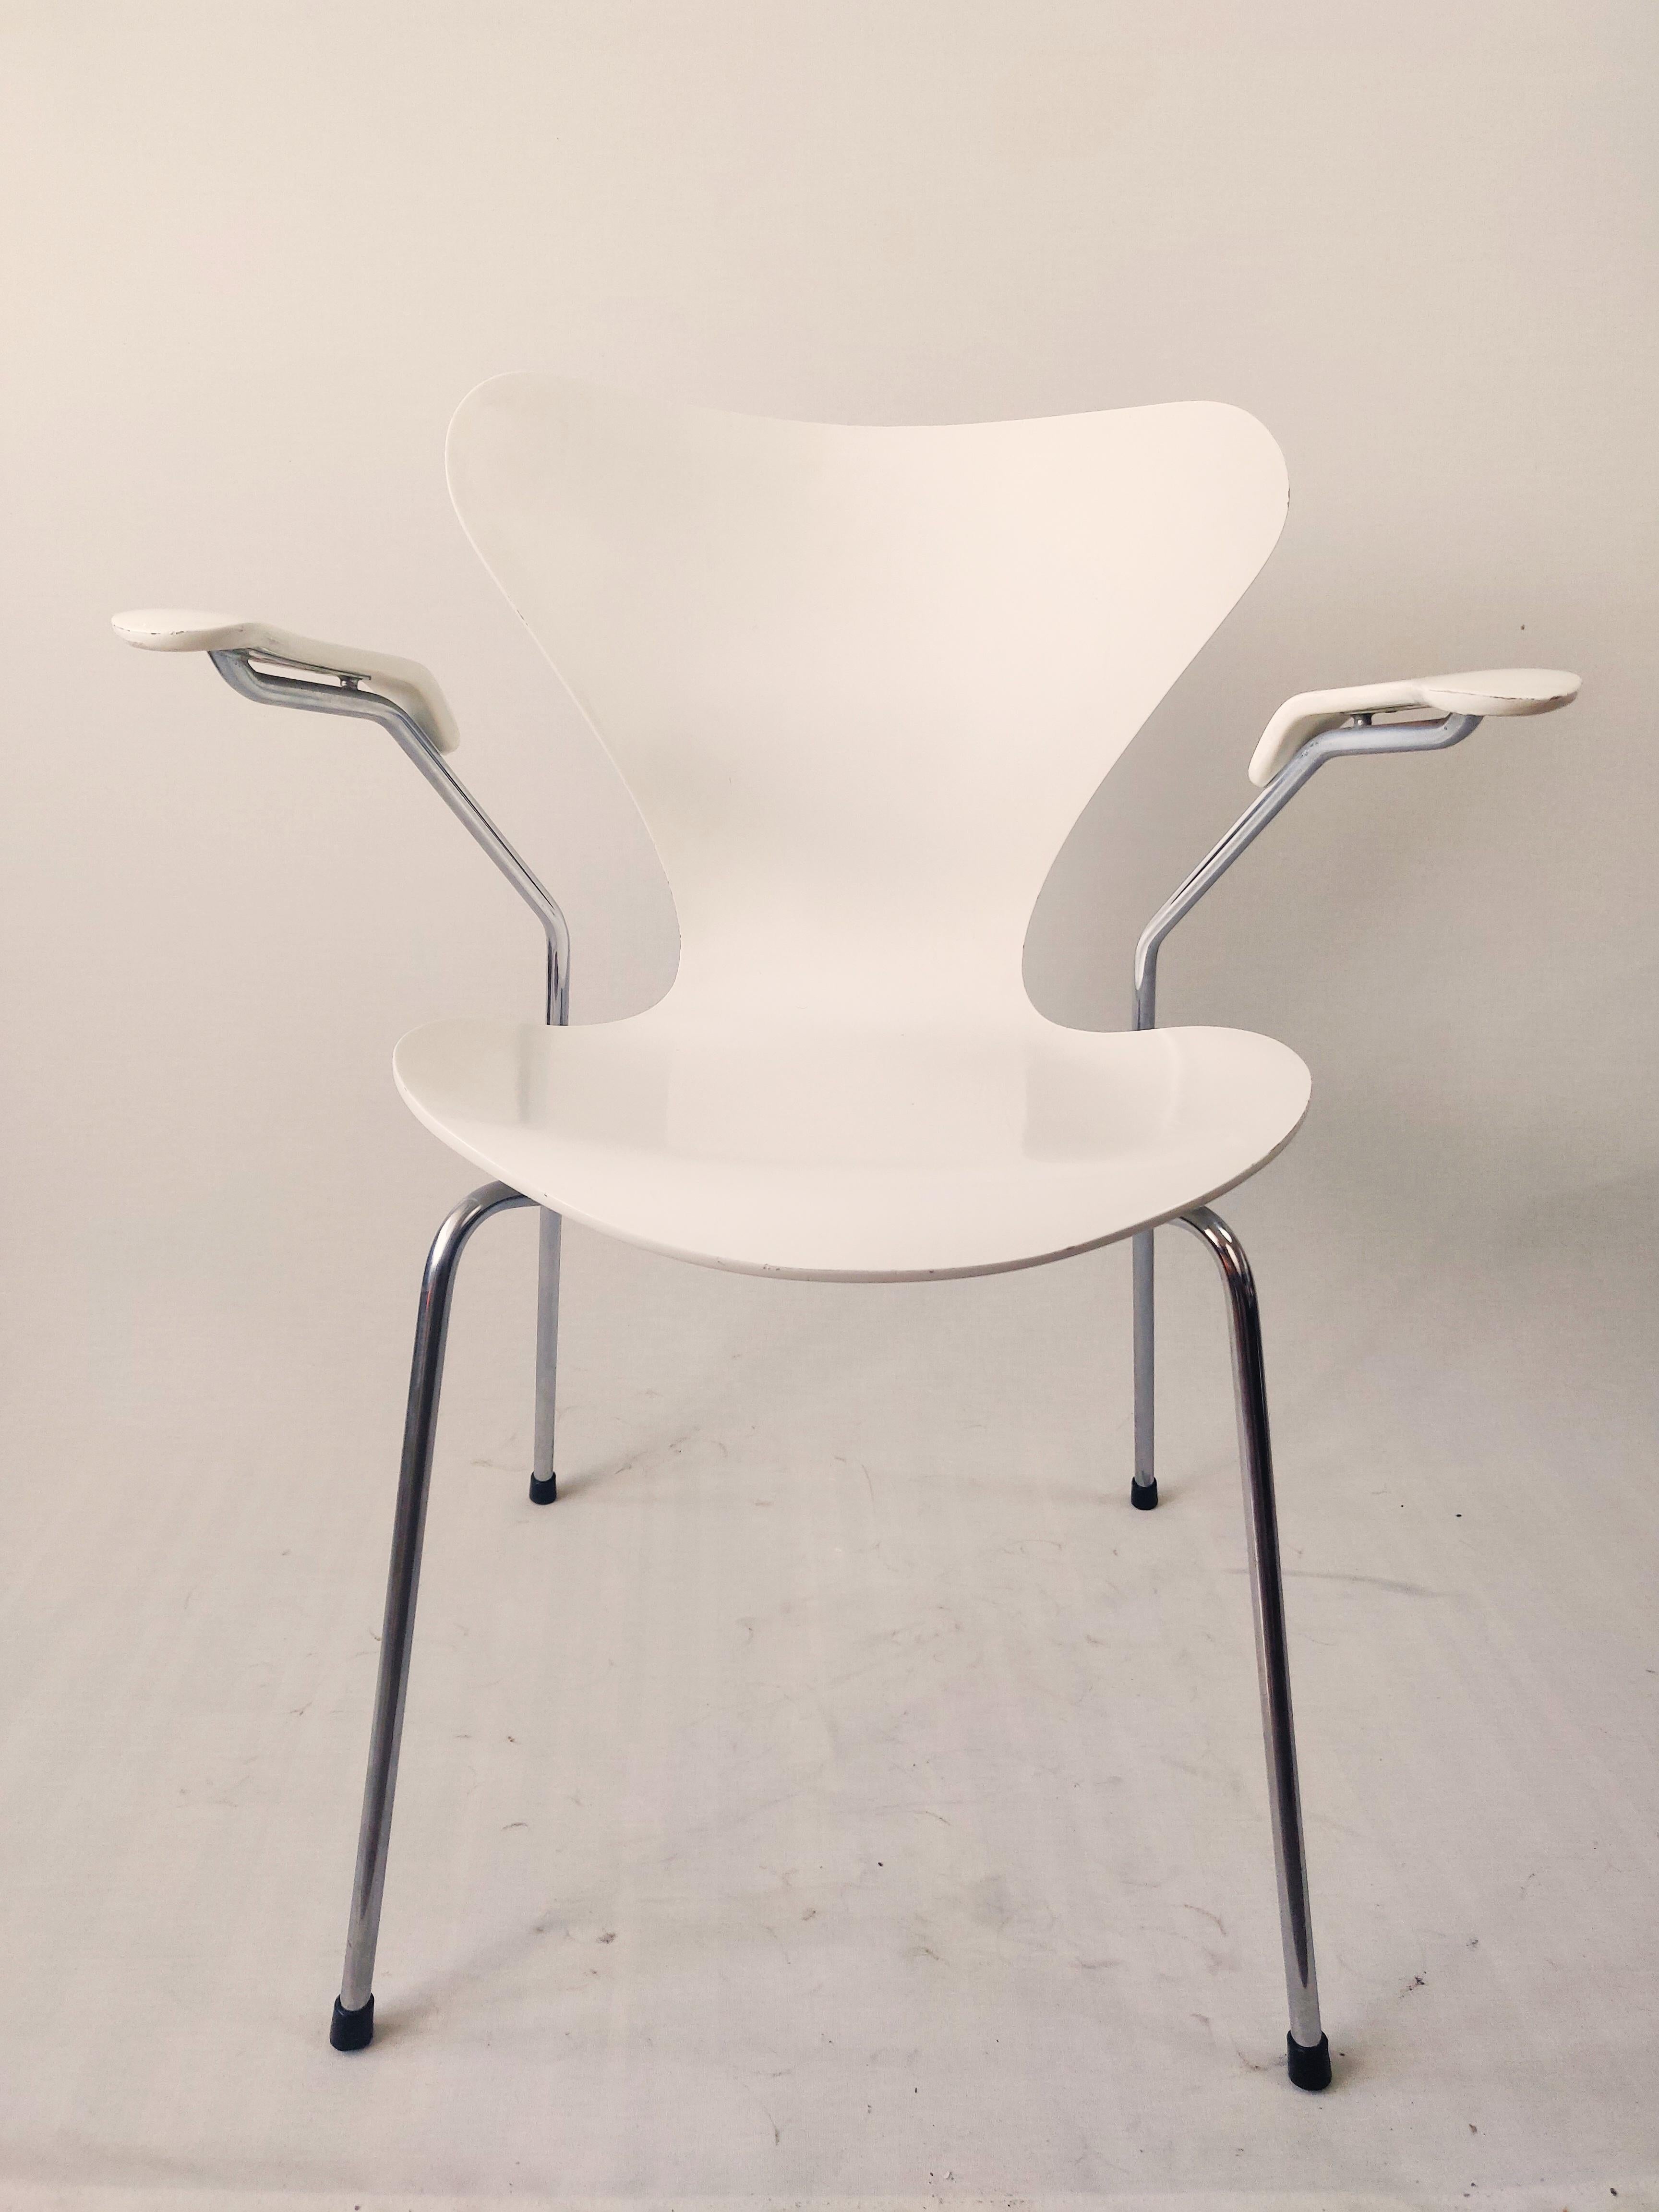 The Series 7 designed by Arne Jacobsen is one of the most iconic chairs in the history of Fritz Hansen and perhaps also in furniture history. The pressure molded veneer chair is a further development of the classic Ant chair.
the 3207 chair has been